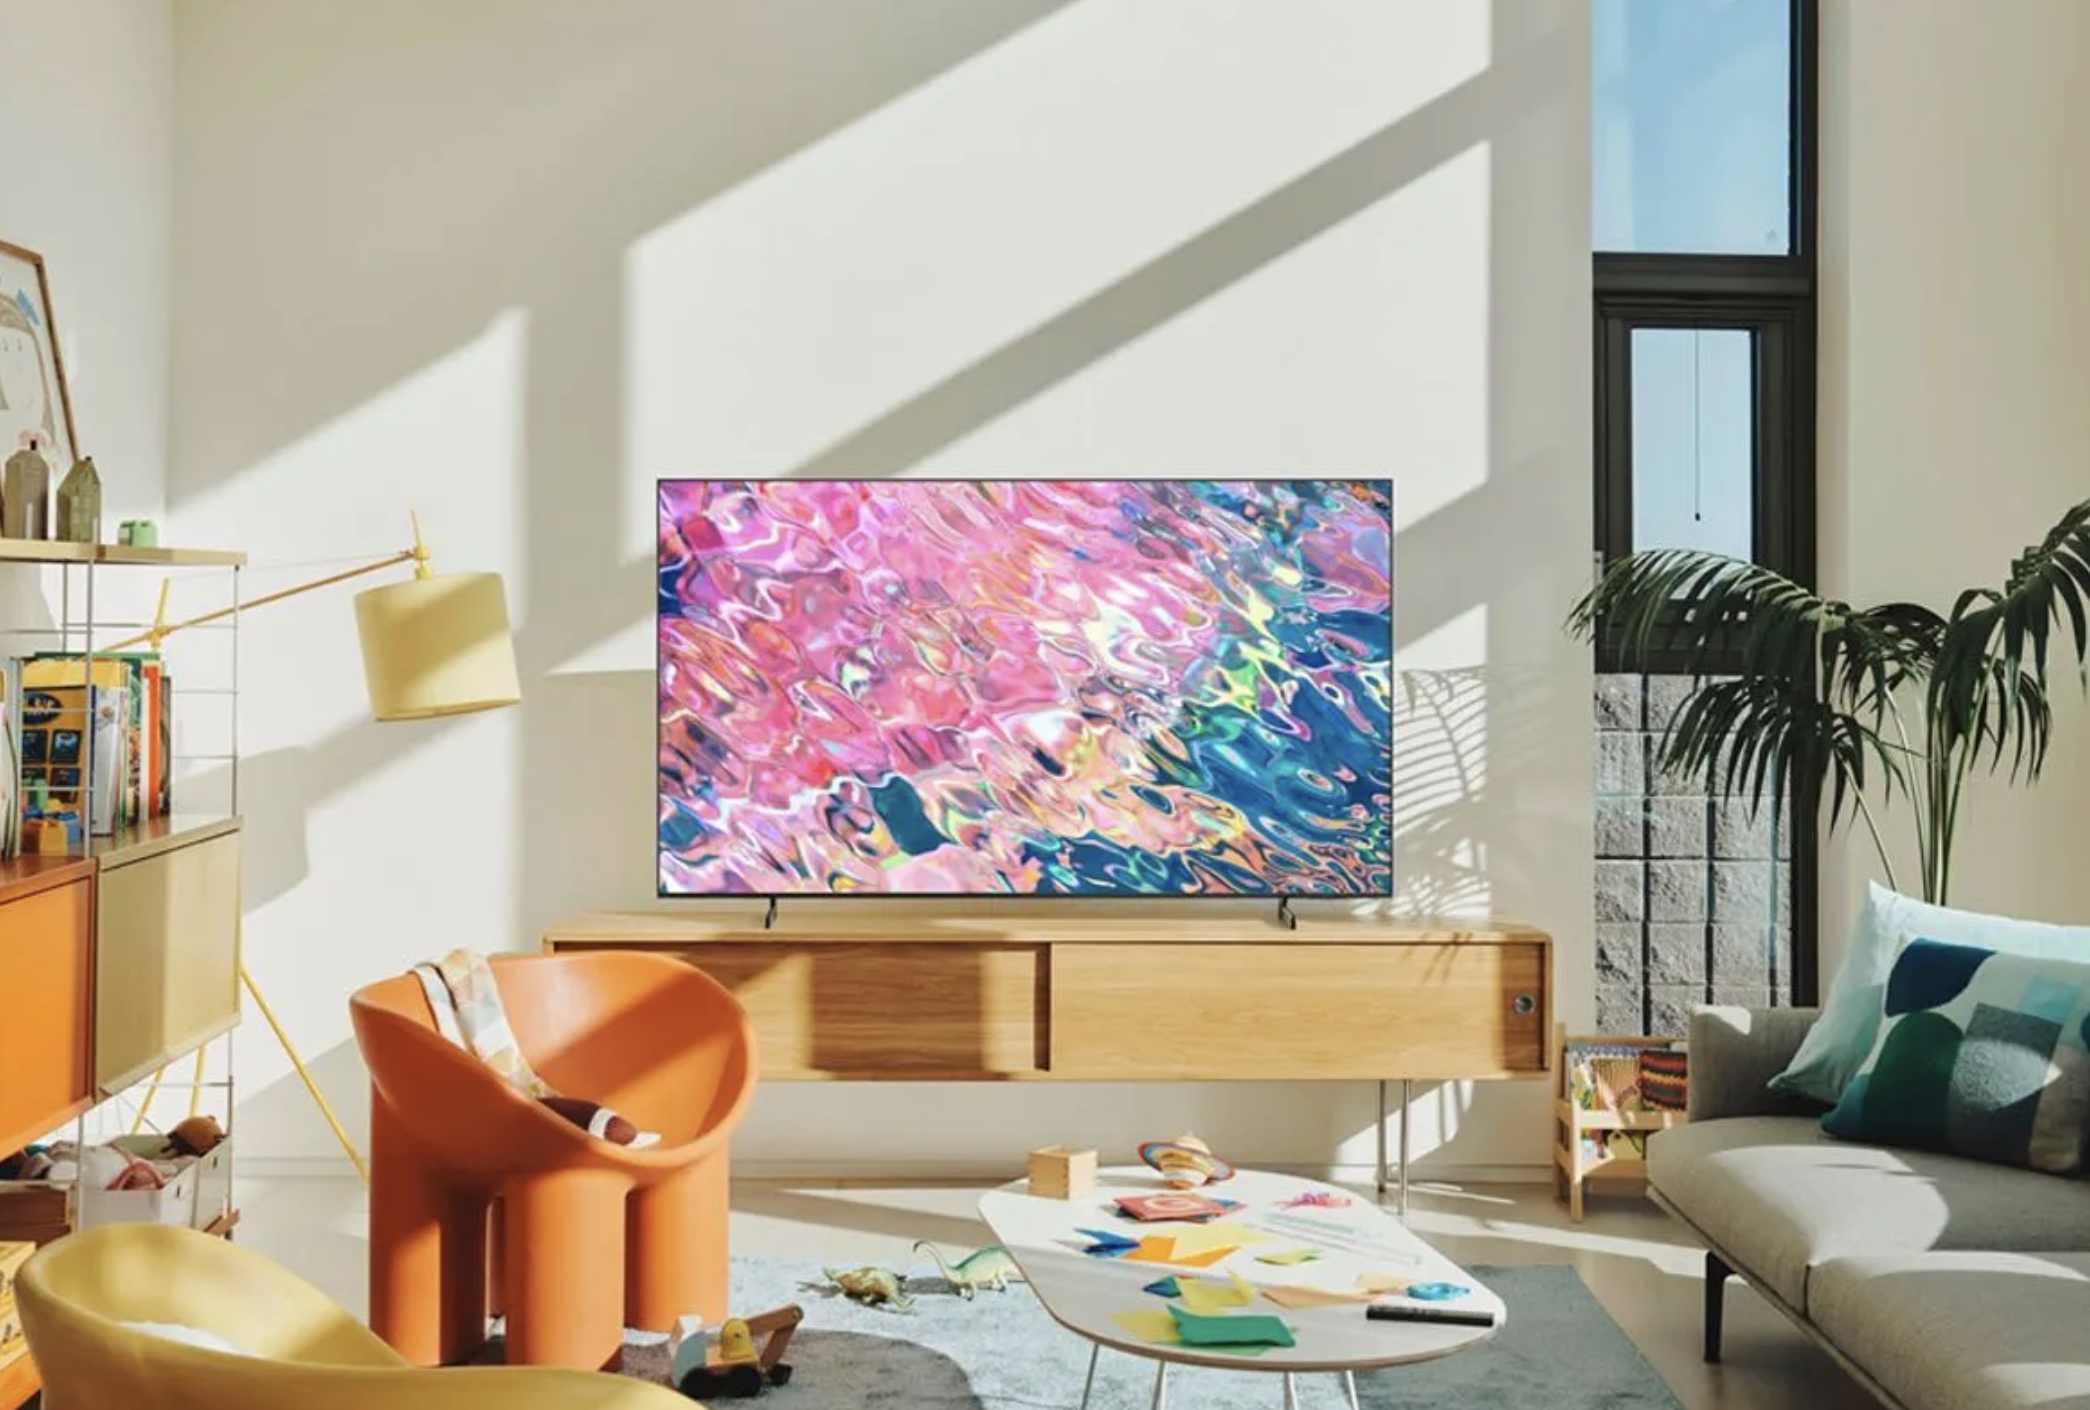 A Samsung Q60B QLED Smart TV sits on the media cabinet in the living room.